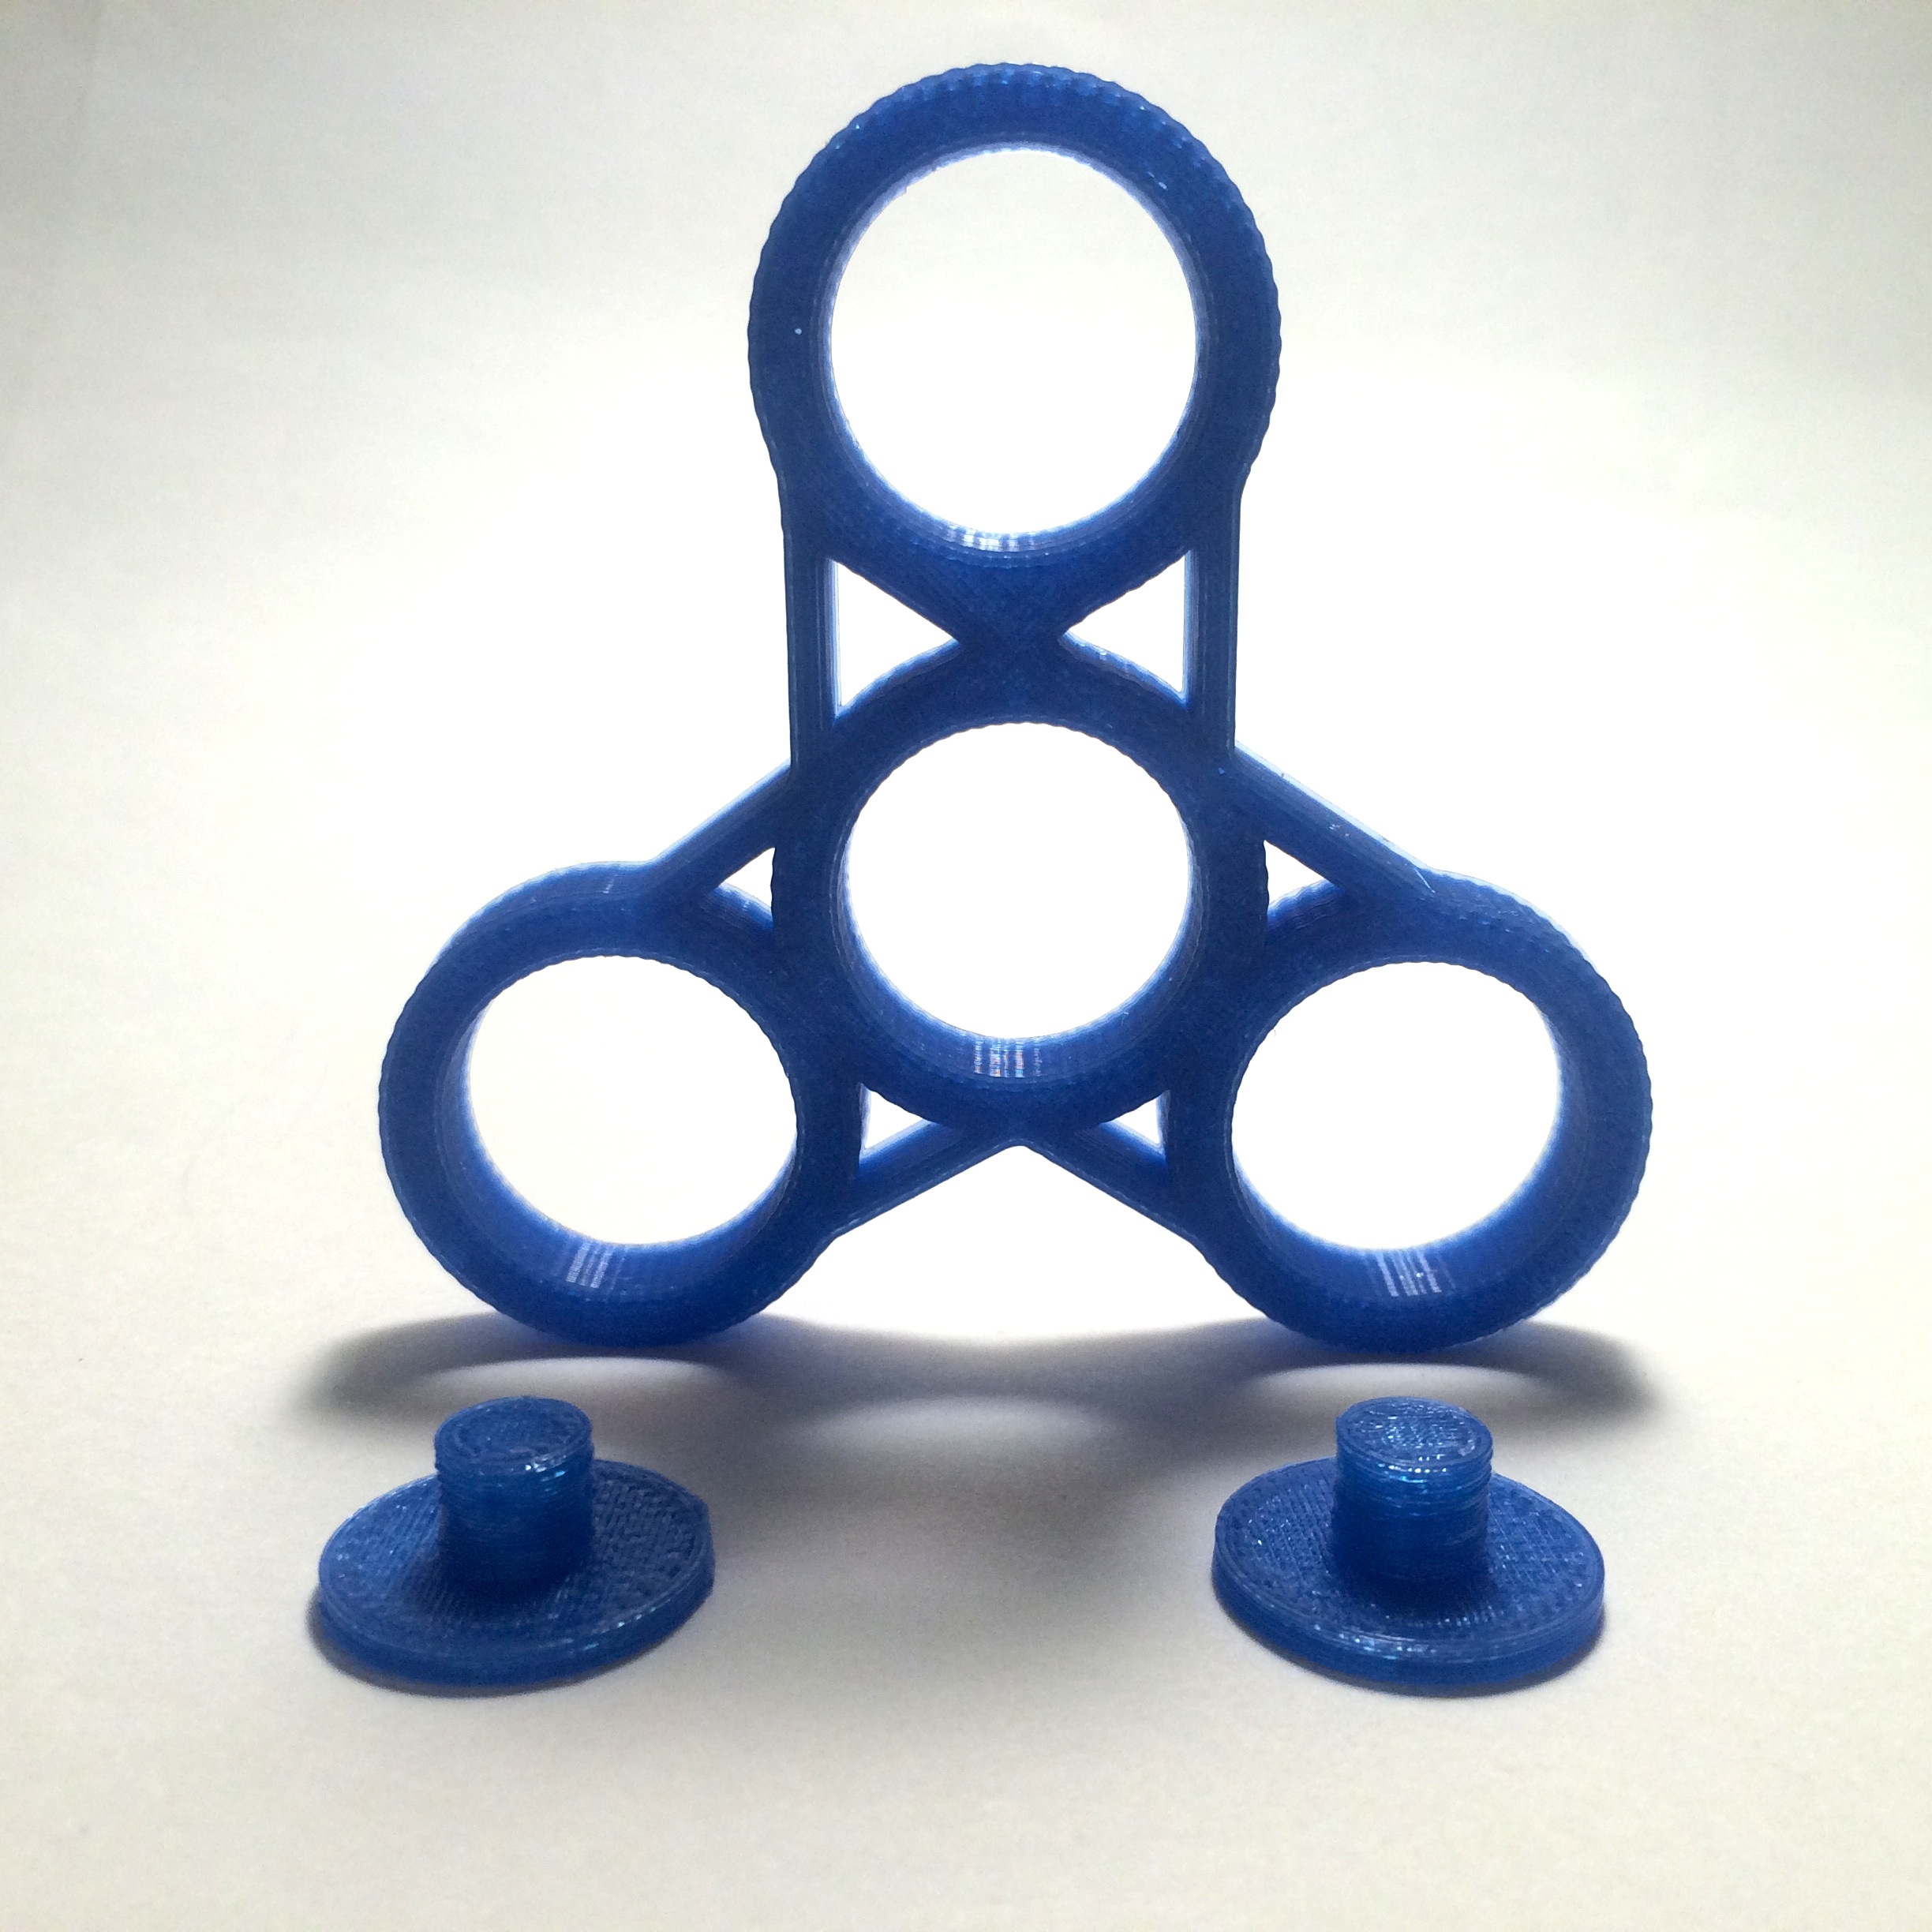 Victor's Fidget Spinner(For the Tinkercad and MyMiniFactory 3D Design Competition)